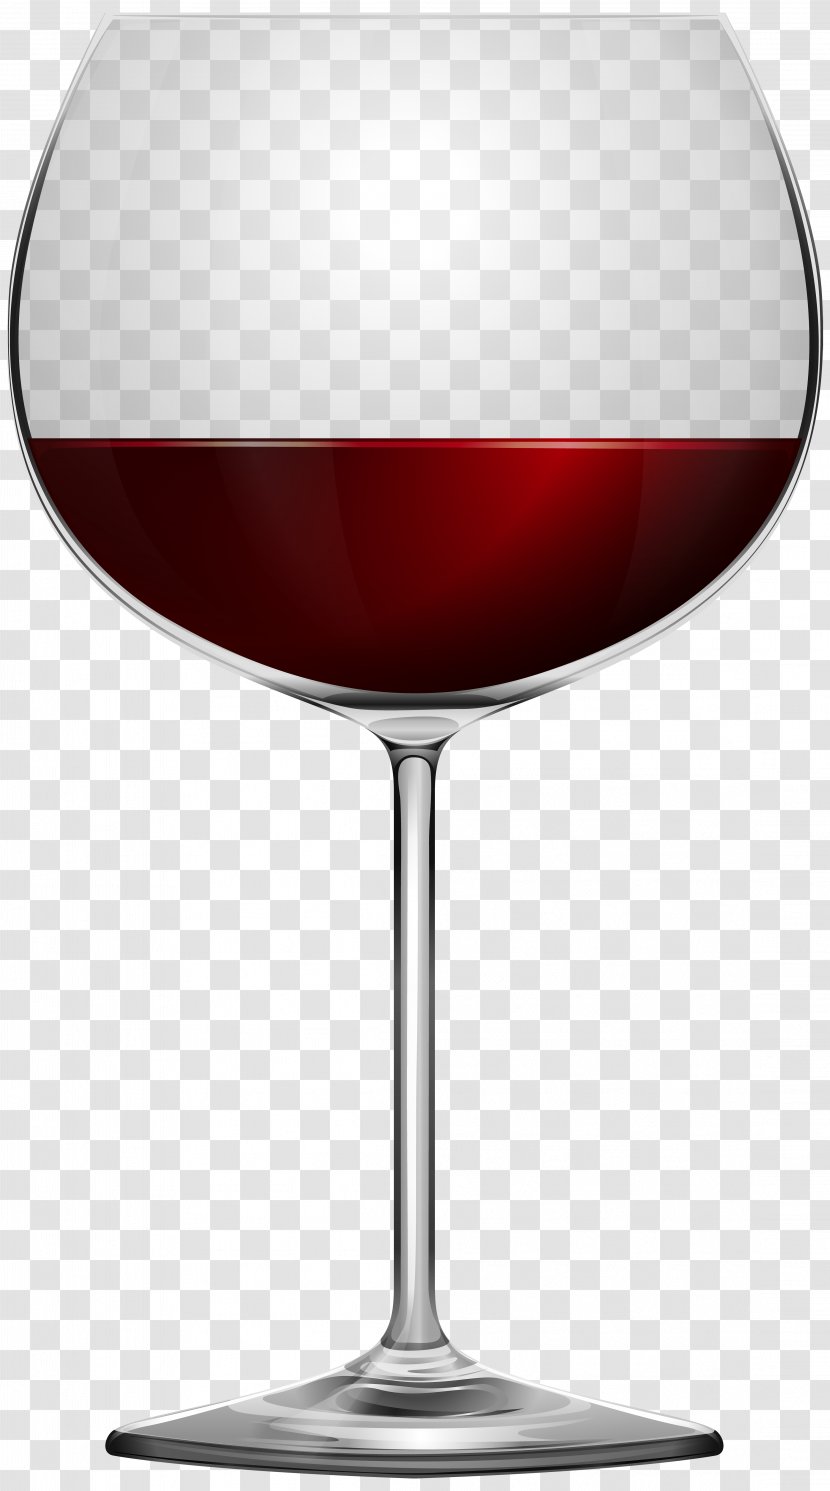 Image File Formats Lossless Compression - Wine - Red Glass Transparent Transparent PNG